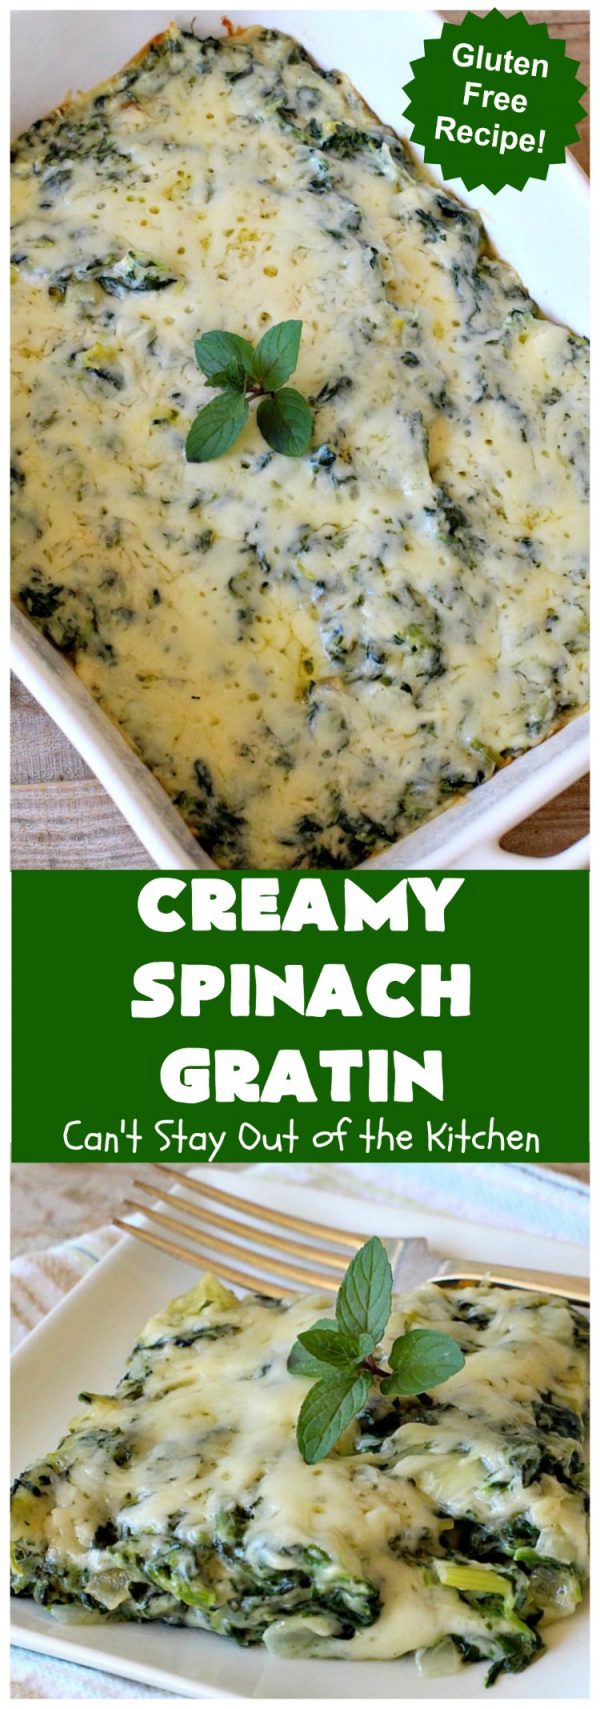 Creamy Spinach Gratin – Can't Stay Out of the Kitchen